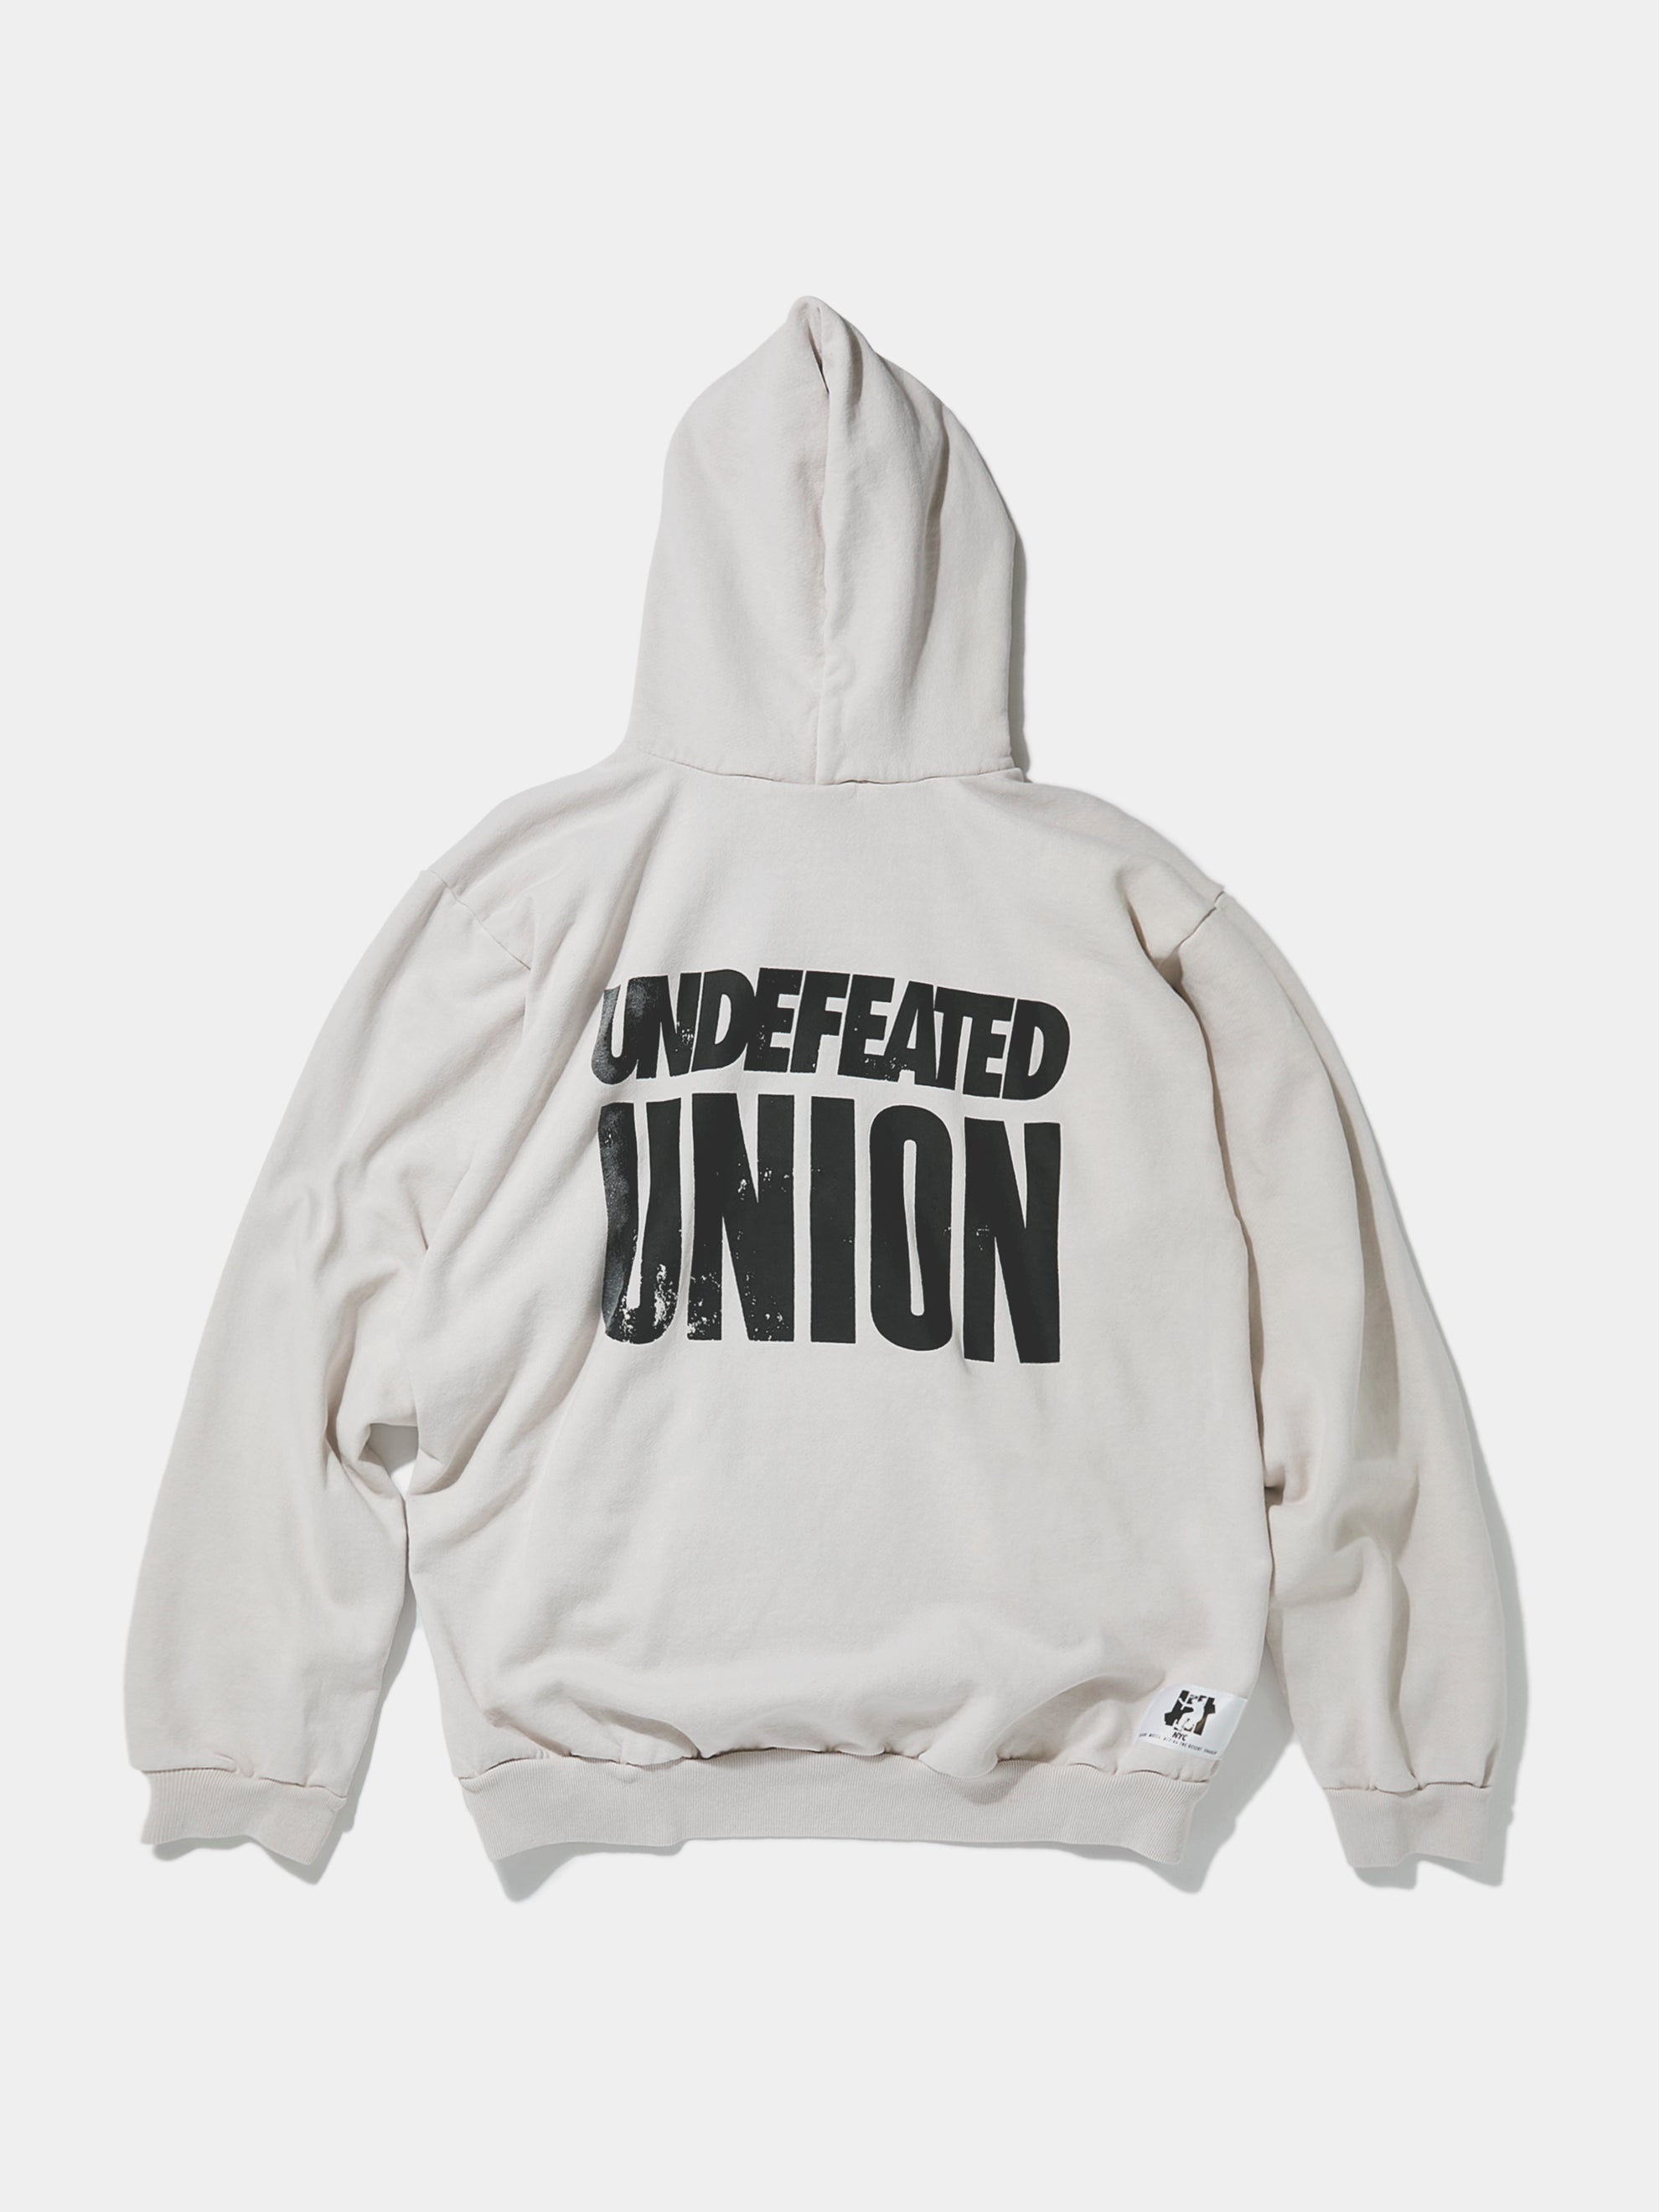 Buy Undefeated UNDEFEATED x UNION Hoodie (Faded Lt